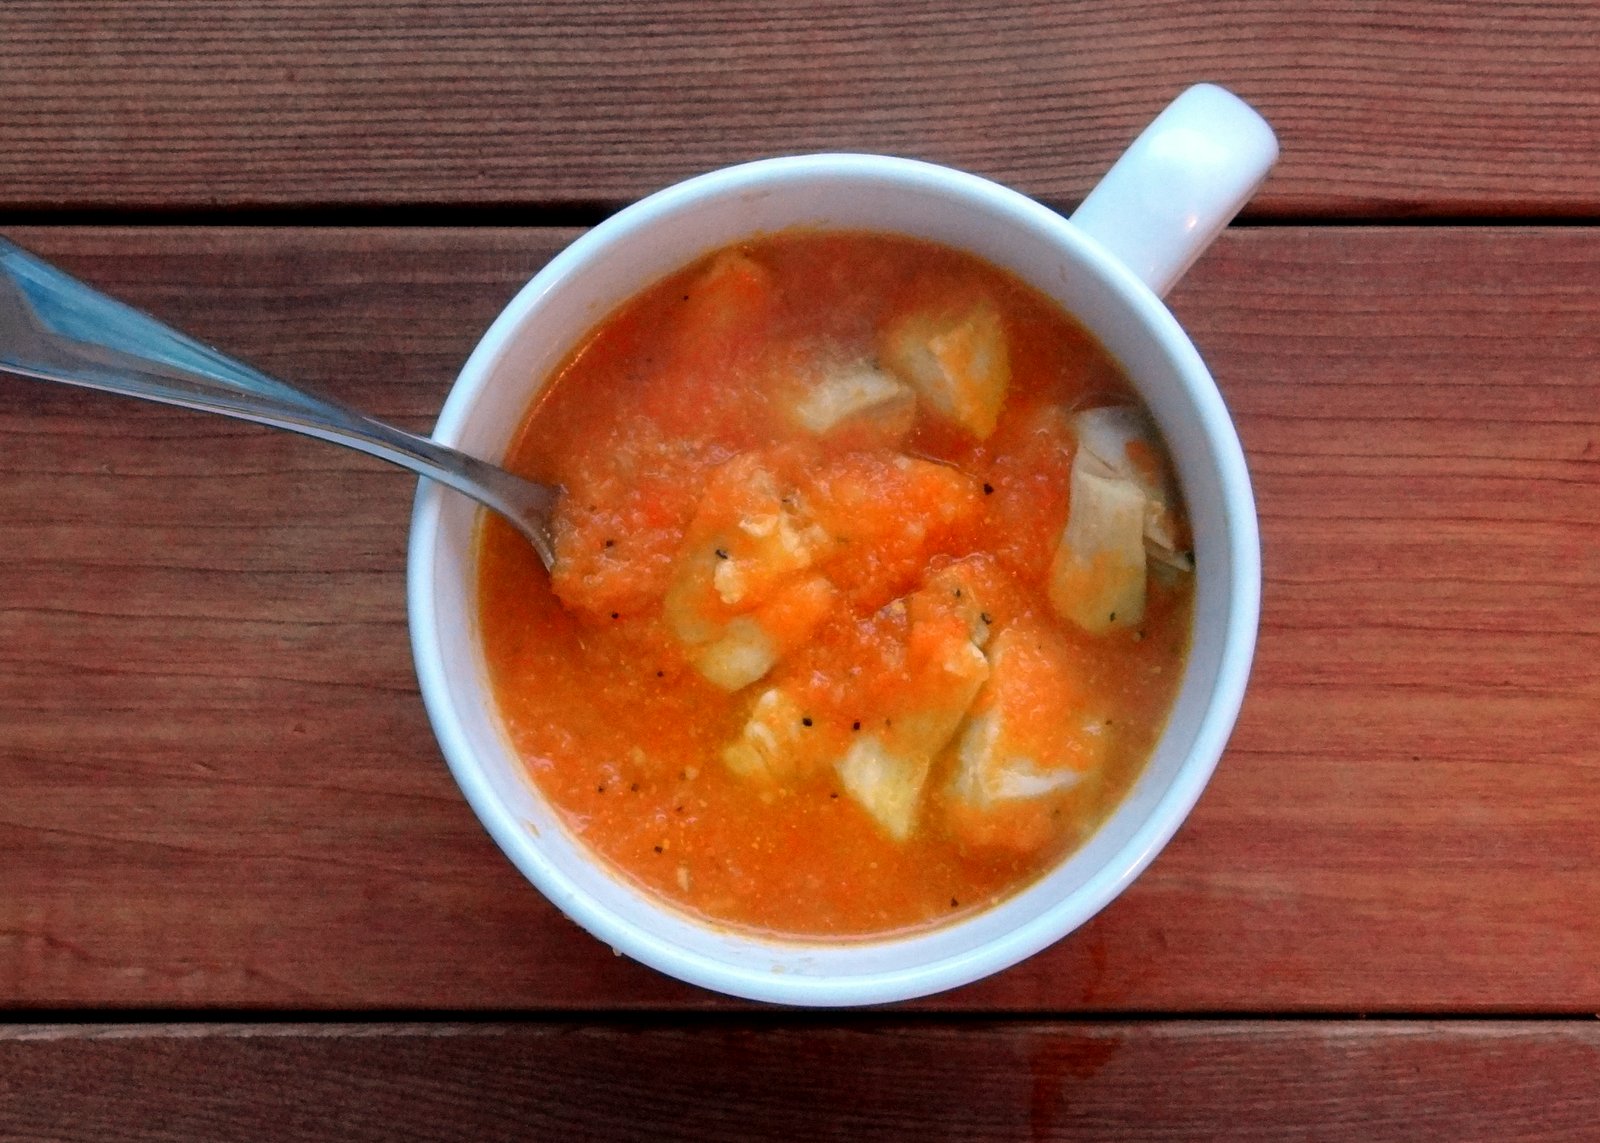 bowl of soup, bright orange in color from the carrots